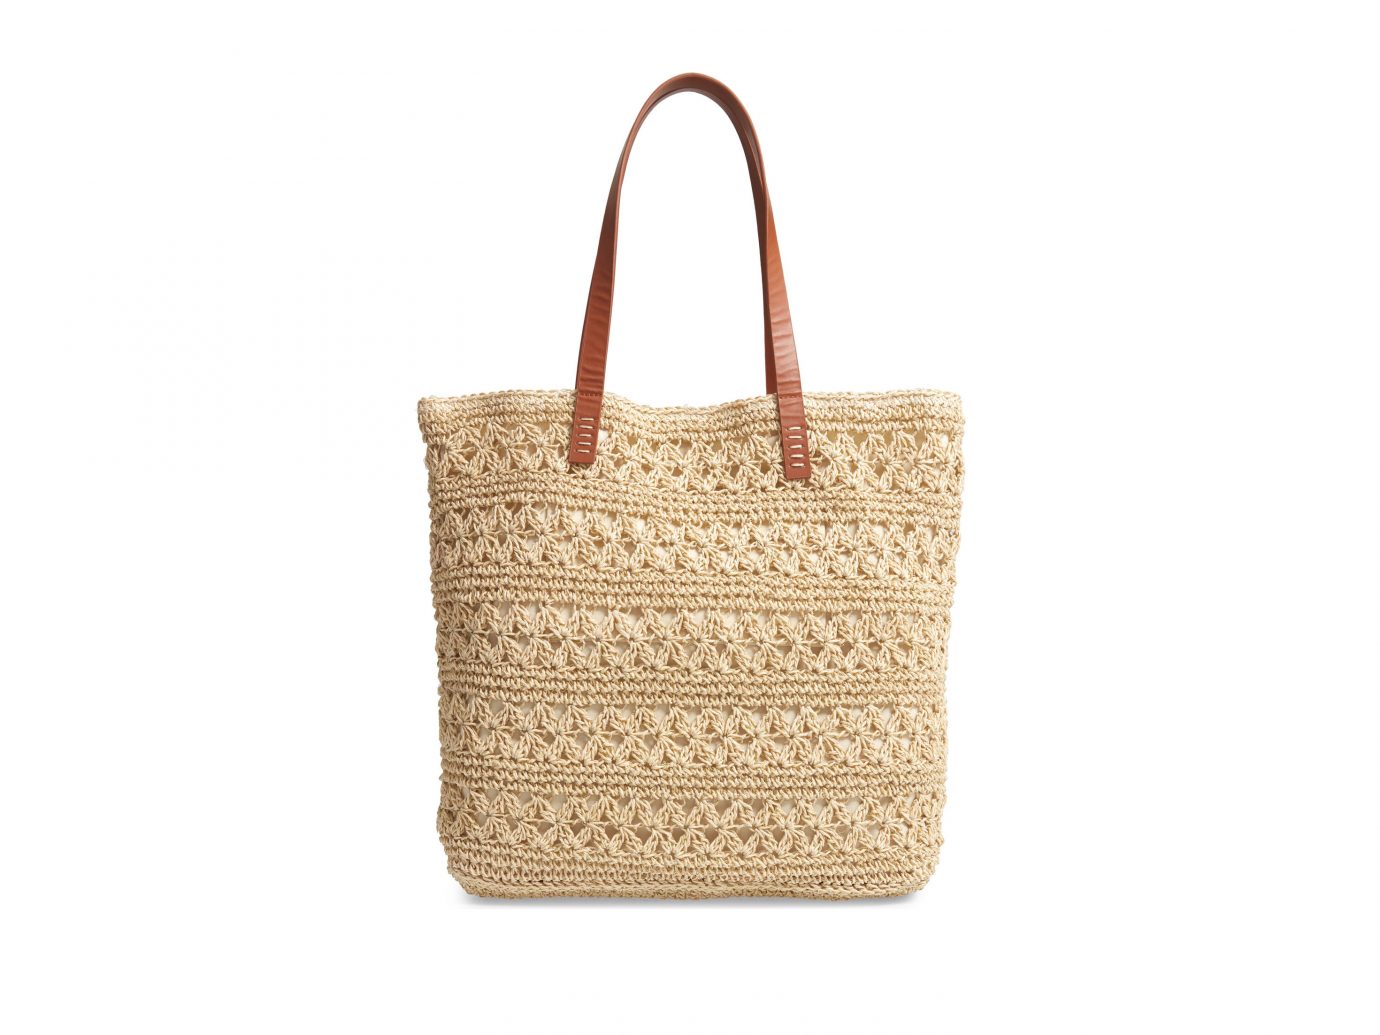 Nordstrom Packable Woven Raffia Tote